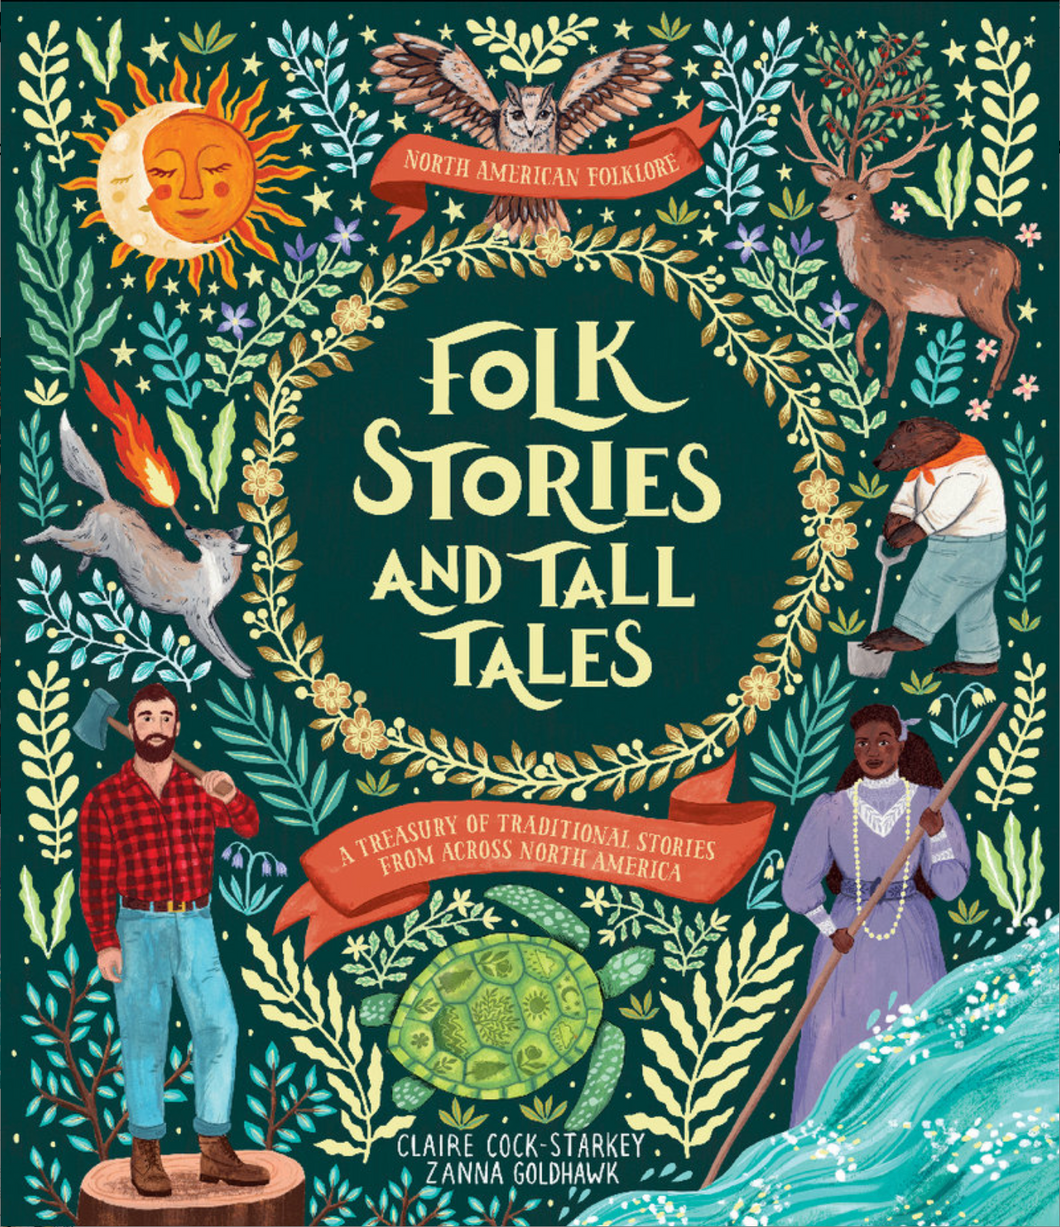 Folk Stories and Tall Tales: A Treasury of Traditional Stories from Across North America [Claire Cock-Starkey]